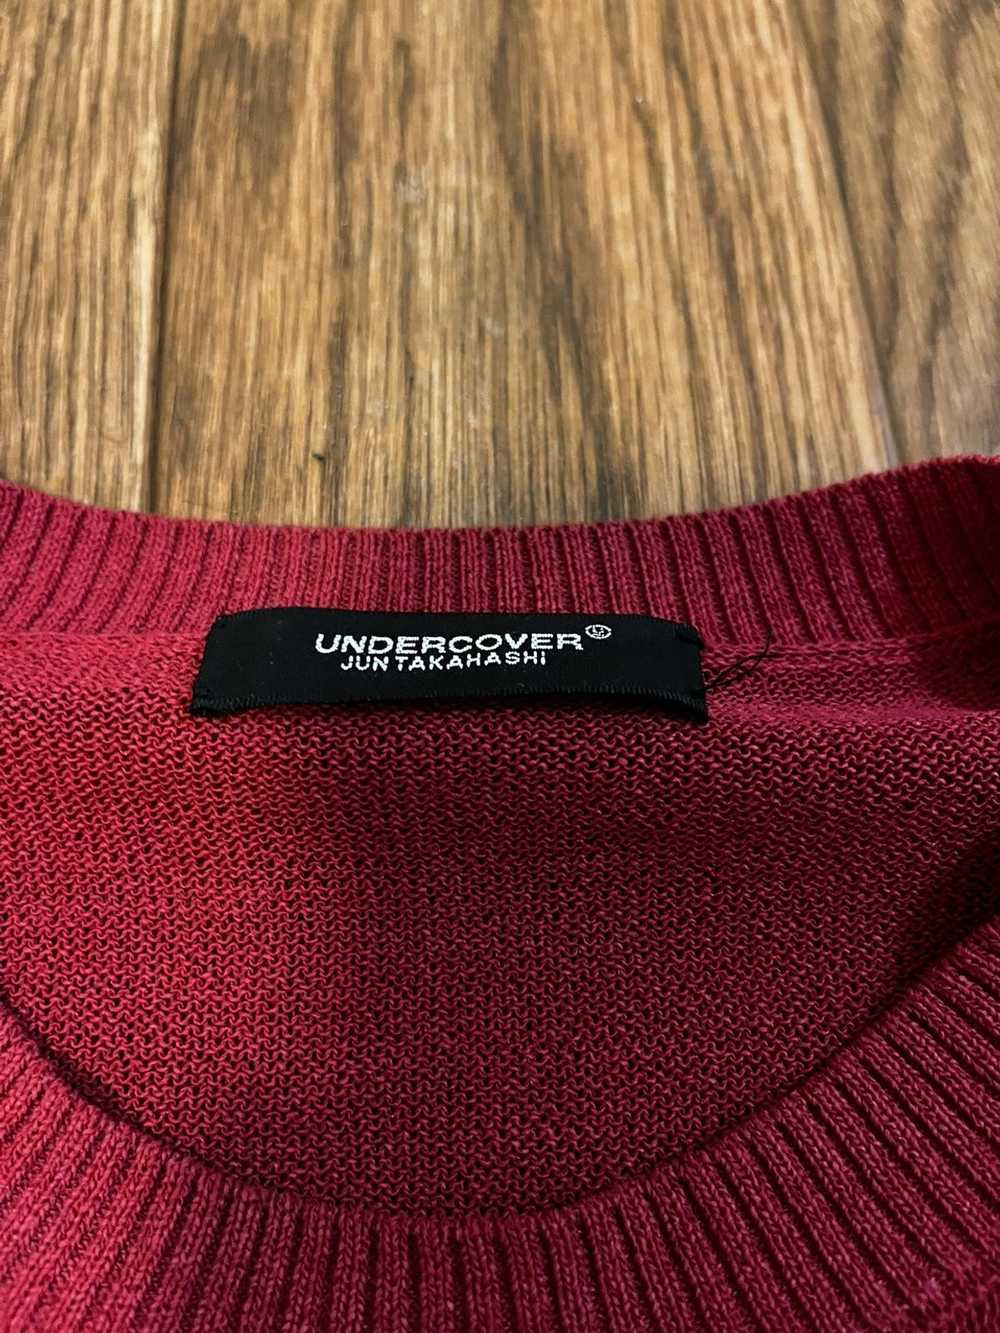 Undercover Undercover SS21 Intarsia Knit Sweater - image 3